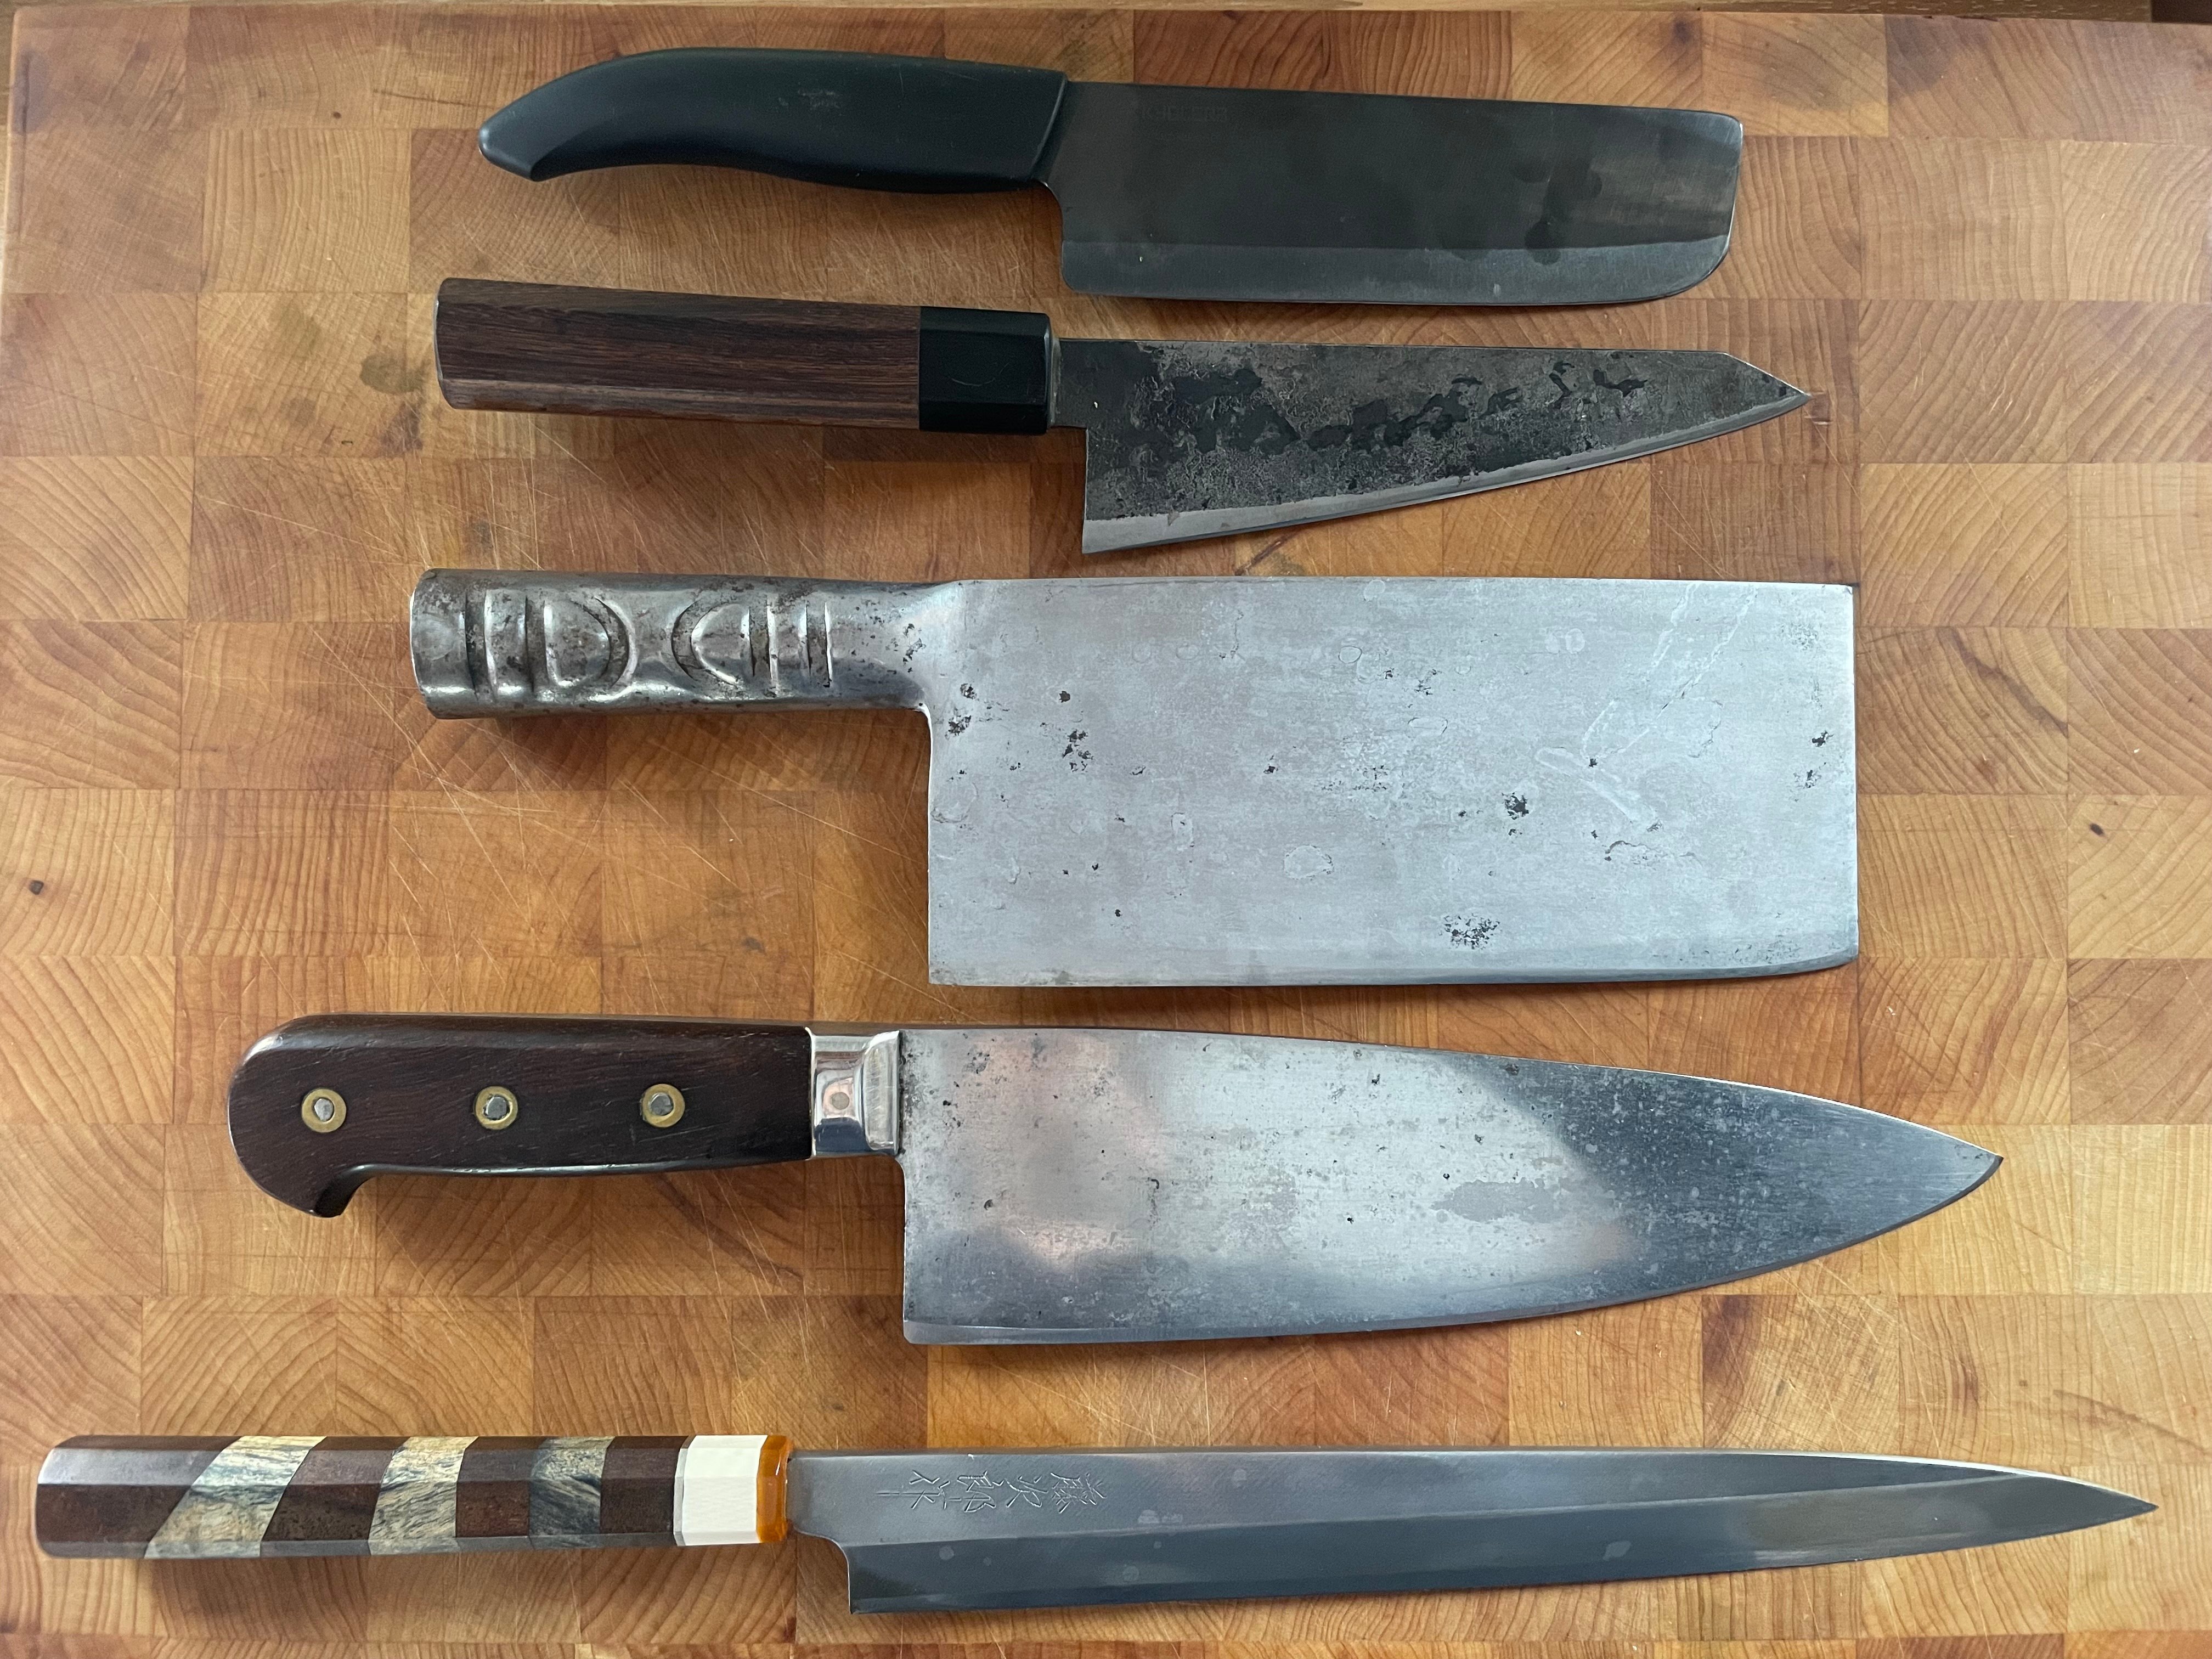 https://www.thechoppingblock.com/hubfs/Blog/Max%20Diverse%20Knives/title%20image.jpg#keepProtocol